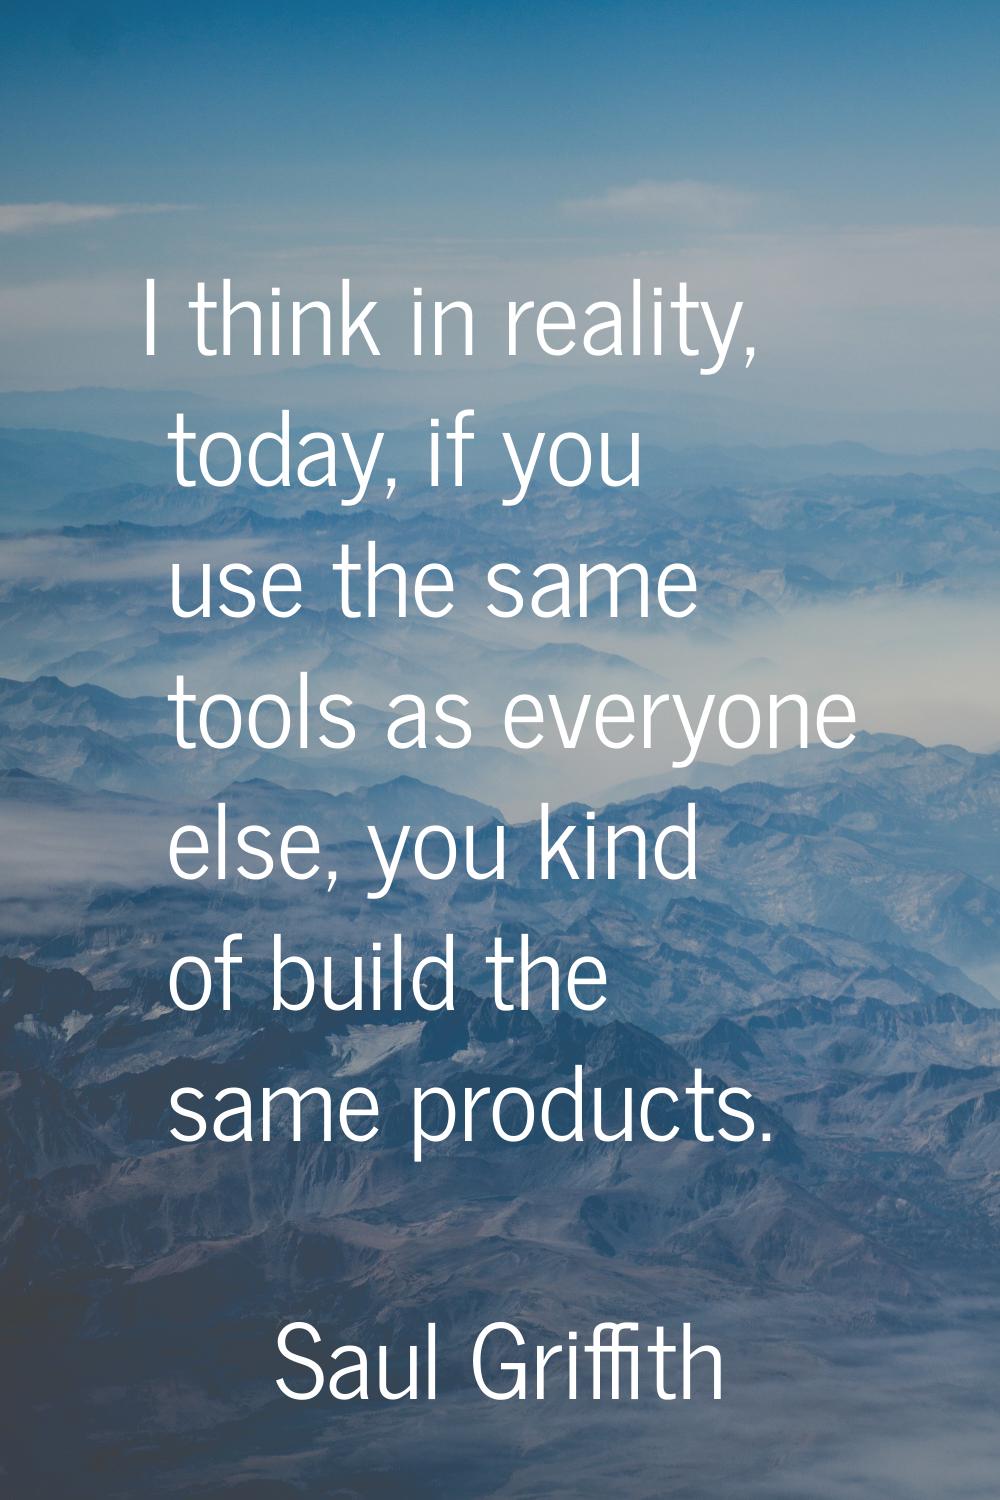 I think in reality, today, if you use the same tools as everyone else, you kind of build the same p